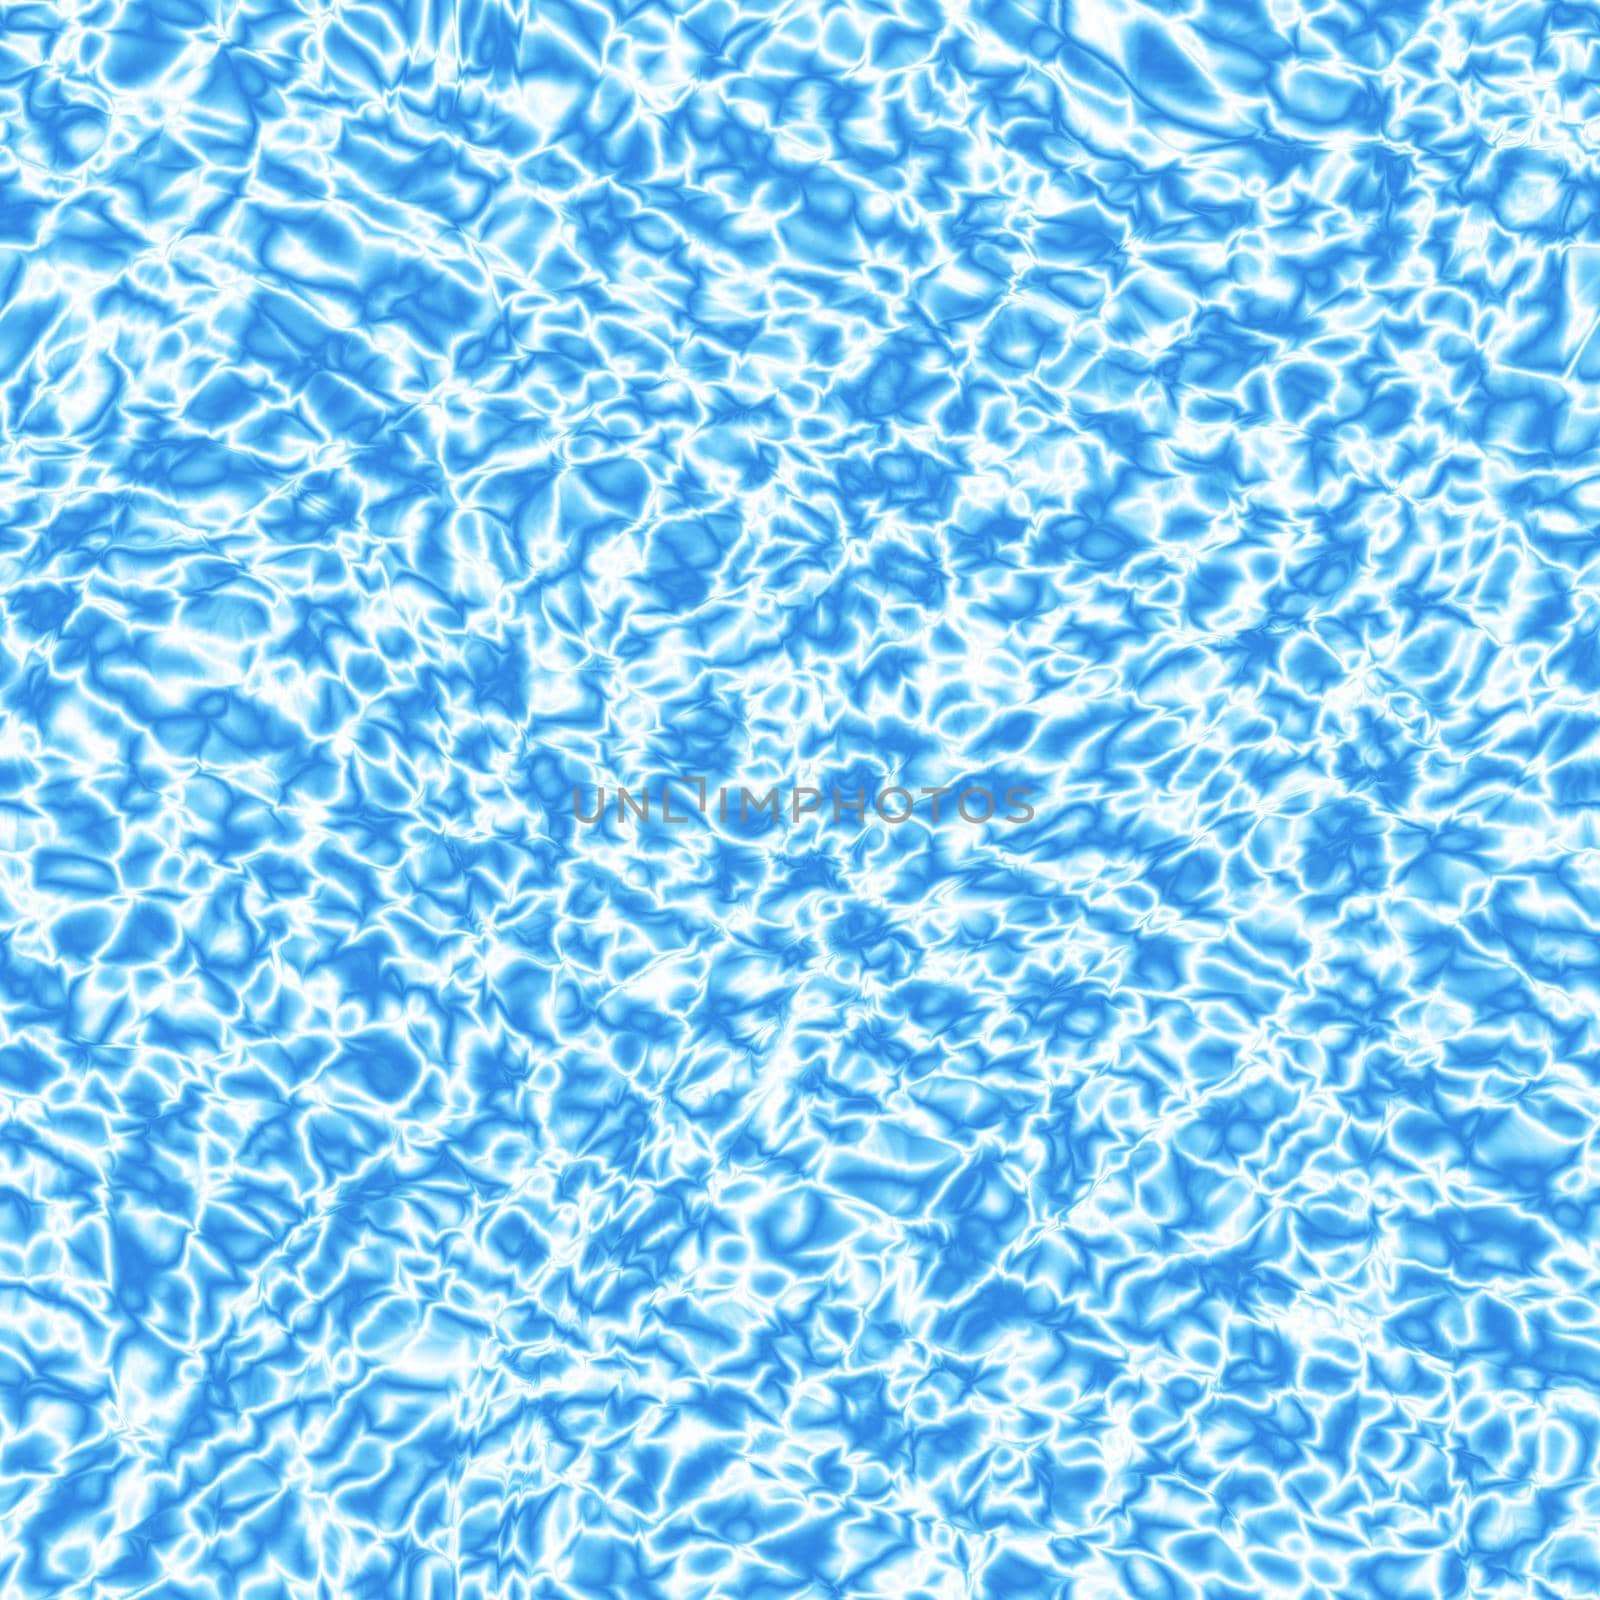 Blue shiny swimming pool water seamless background by kisika